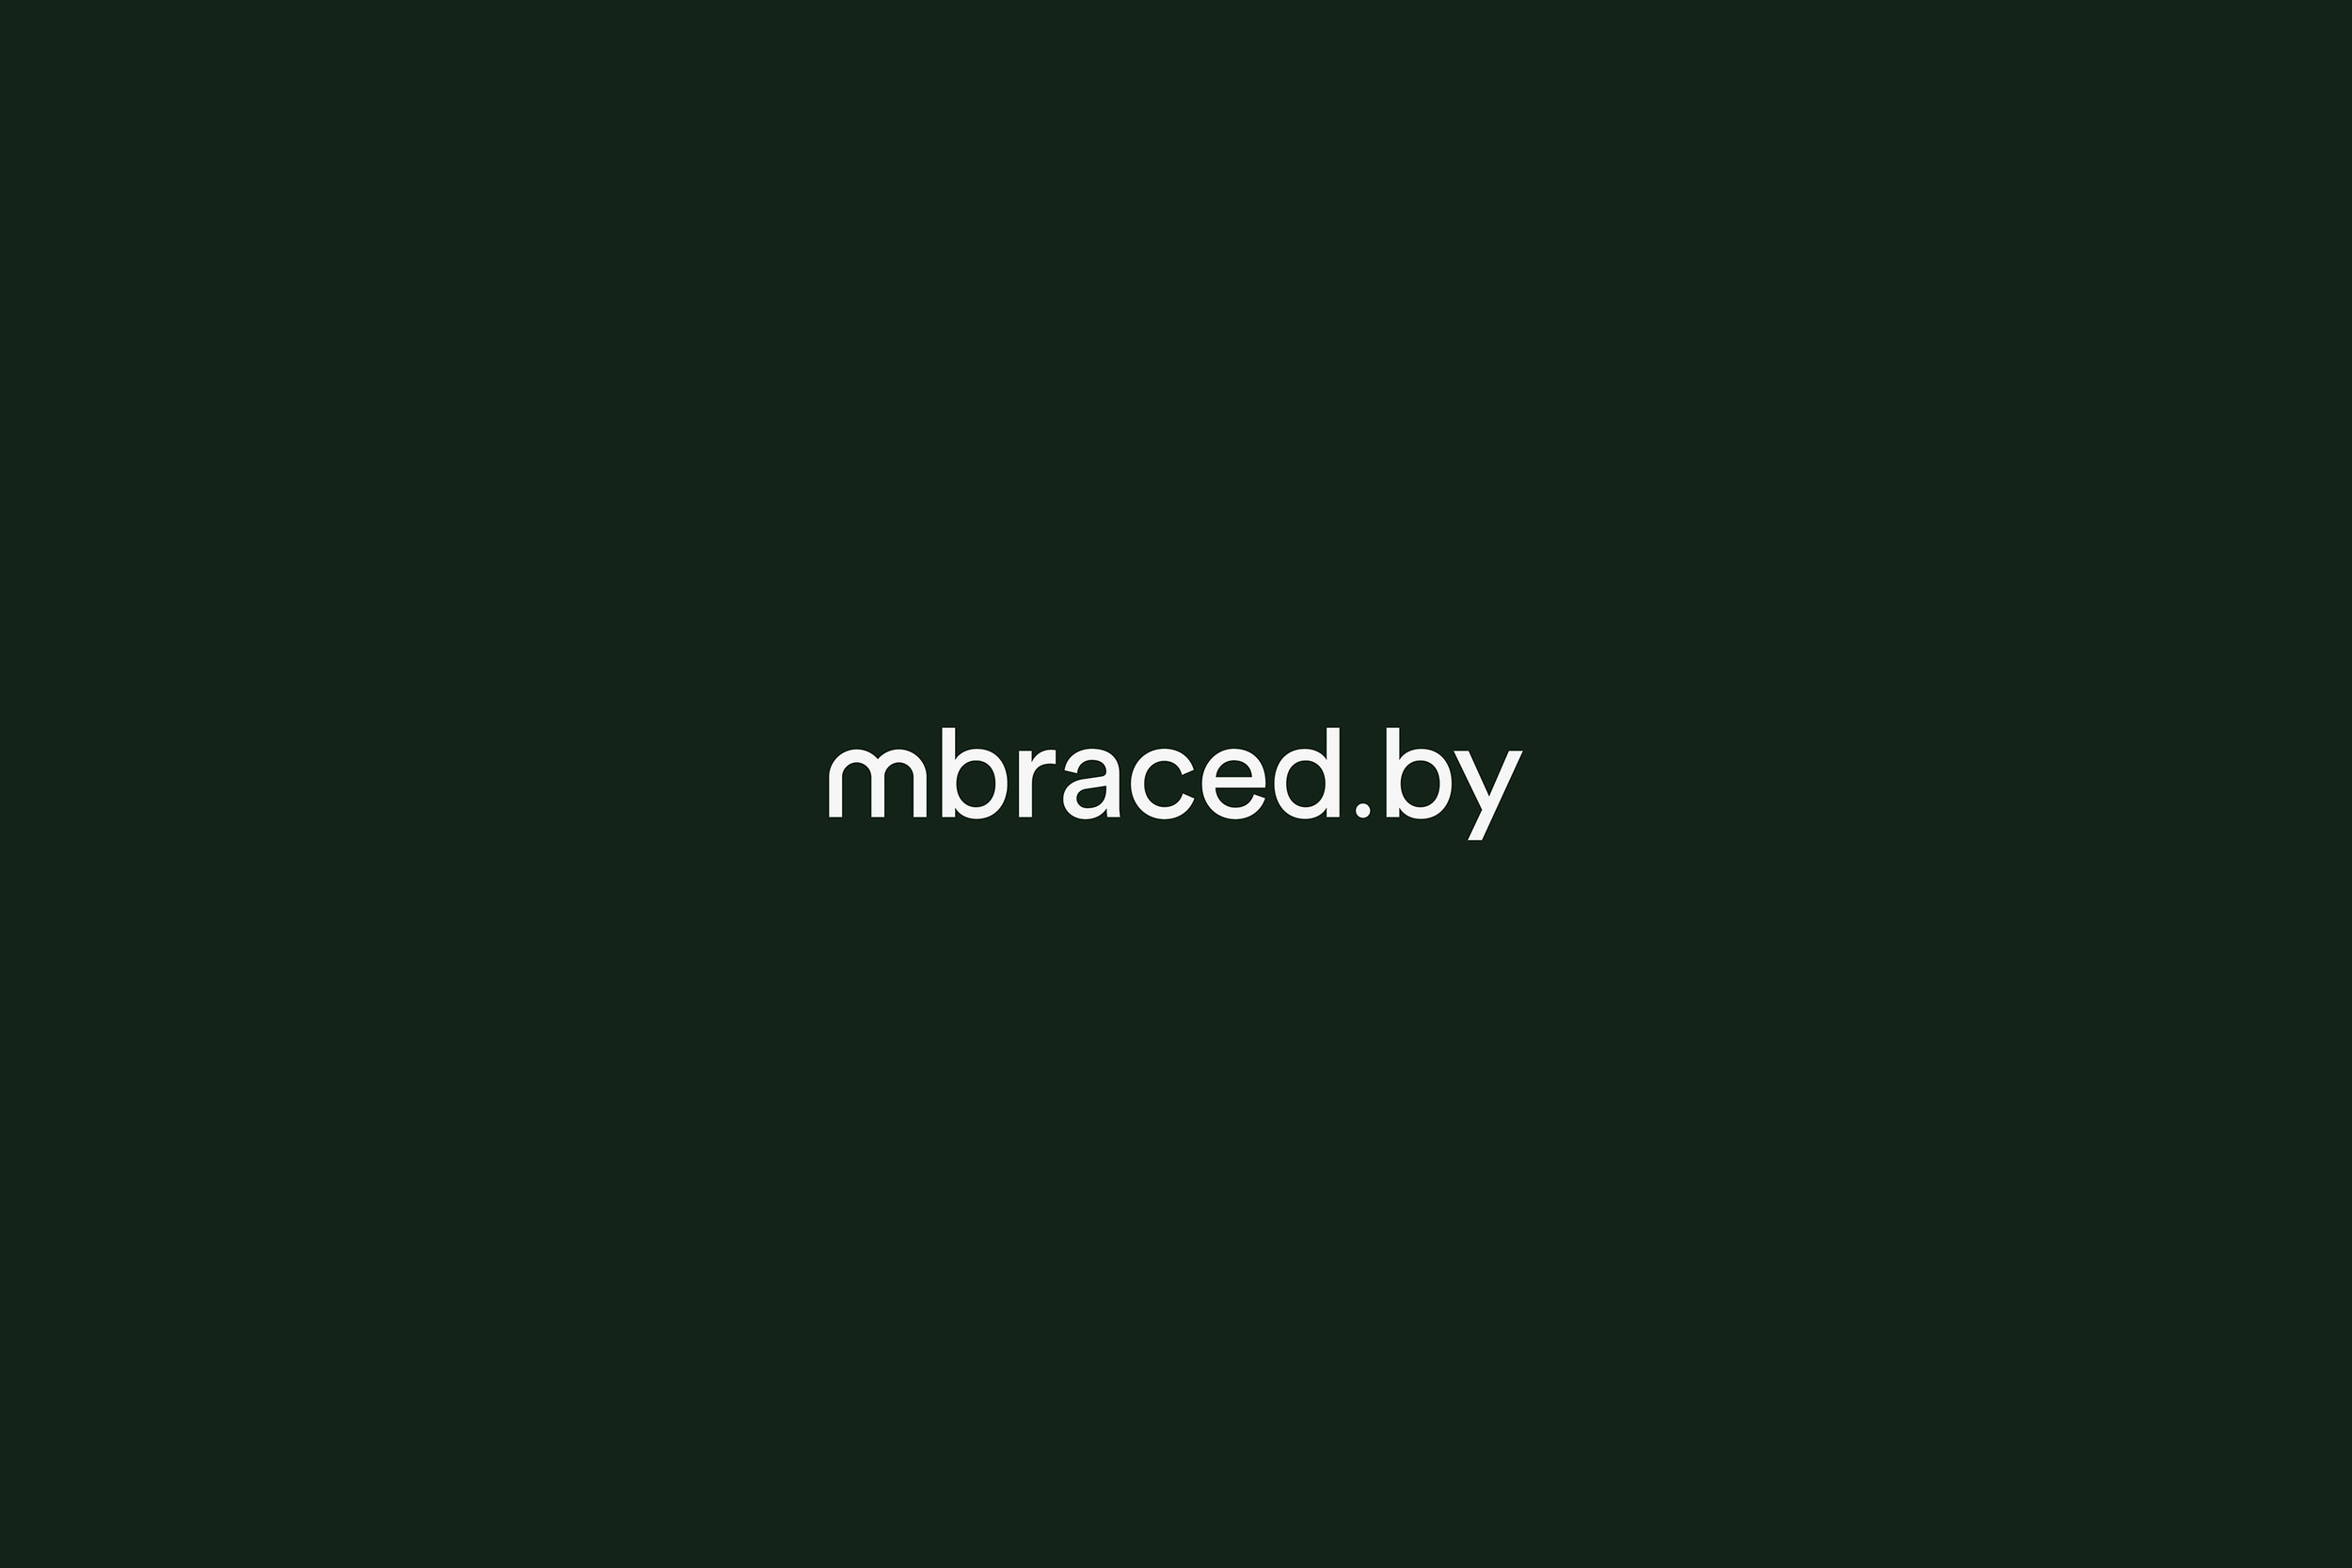 mbraced.by